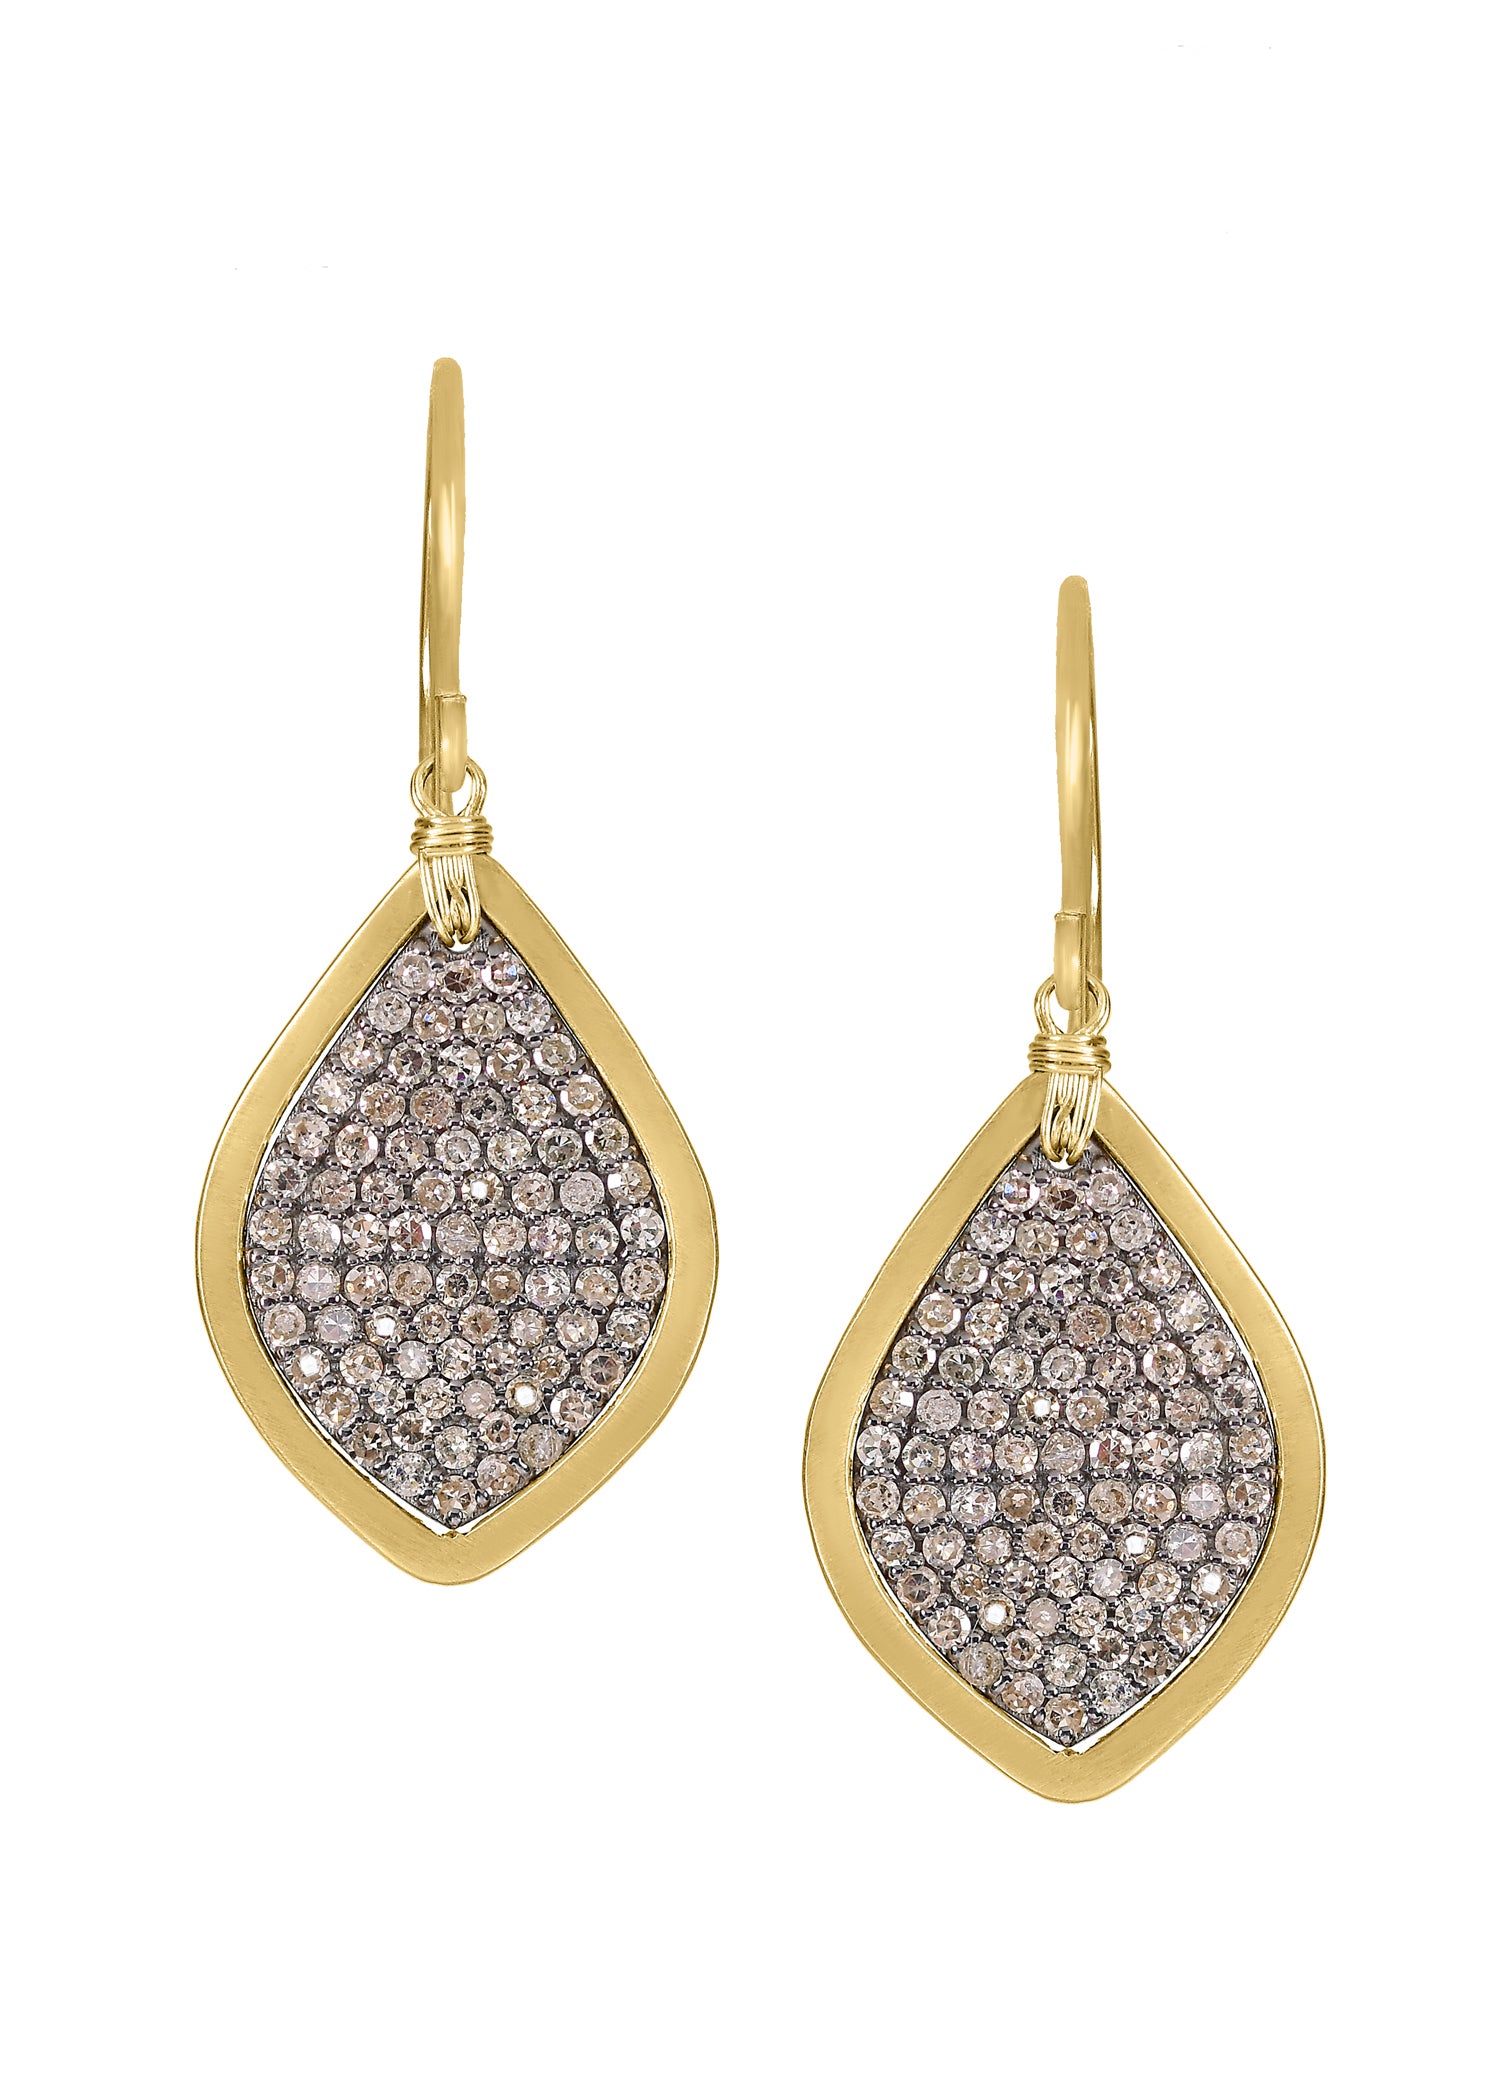 Diamond 14k gold Sterling silver Mixed metal Special order only Earrings measure 1-3/16" in length (including the ear wires) and 1/2" in width at the widest point Handmade in our Los Angeles studio